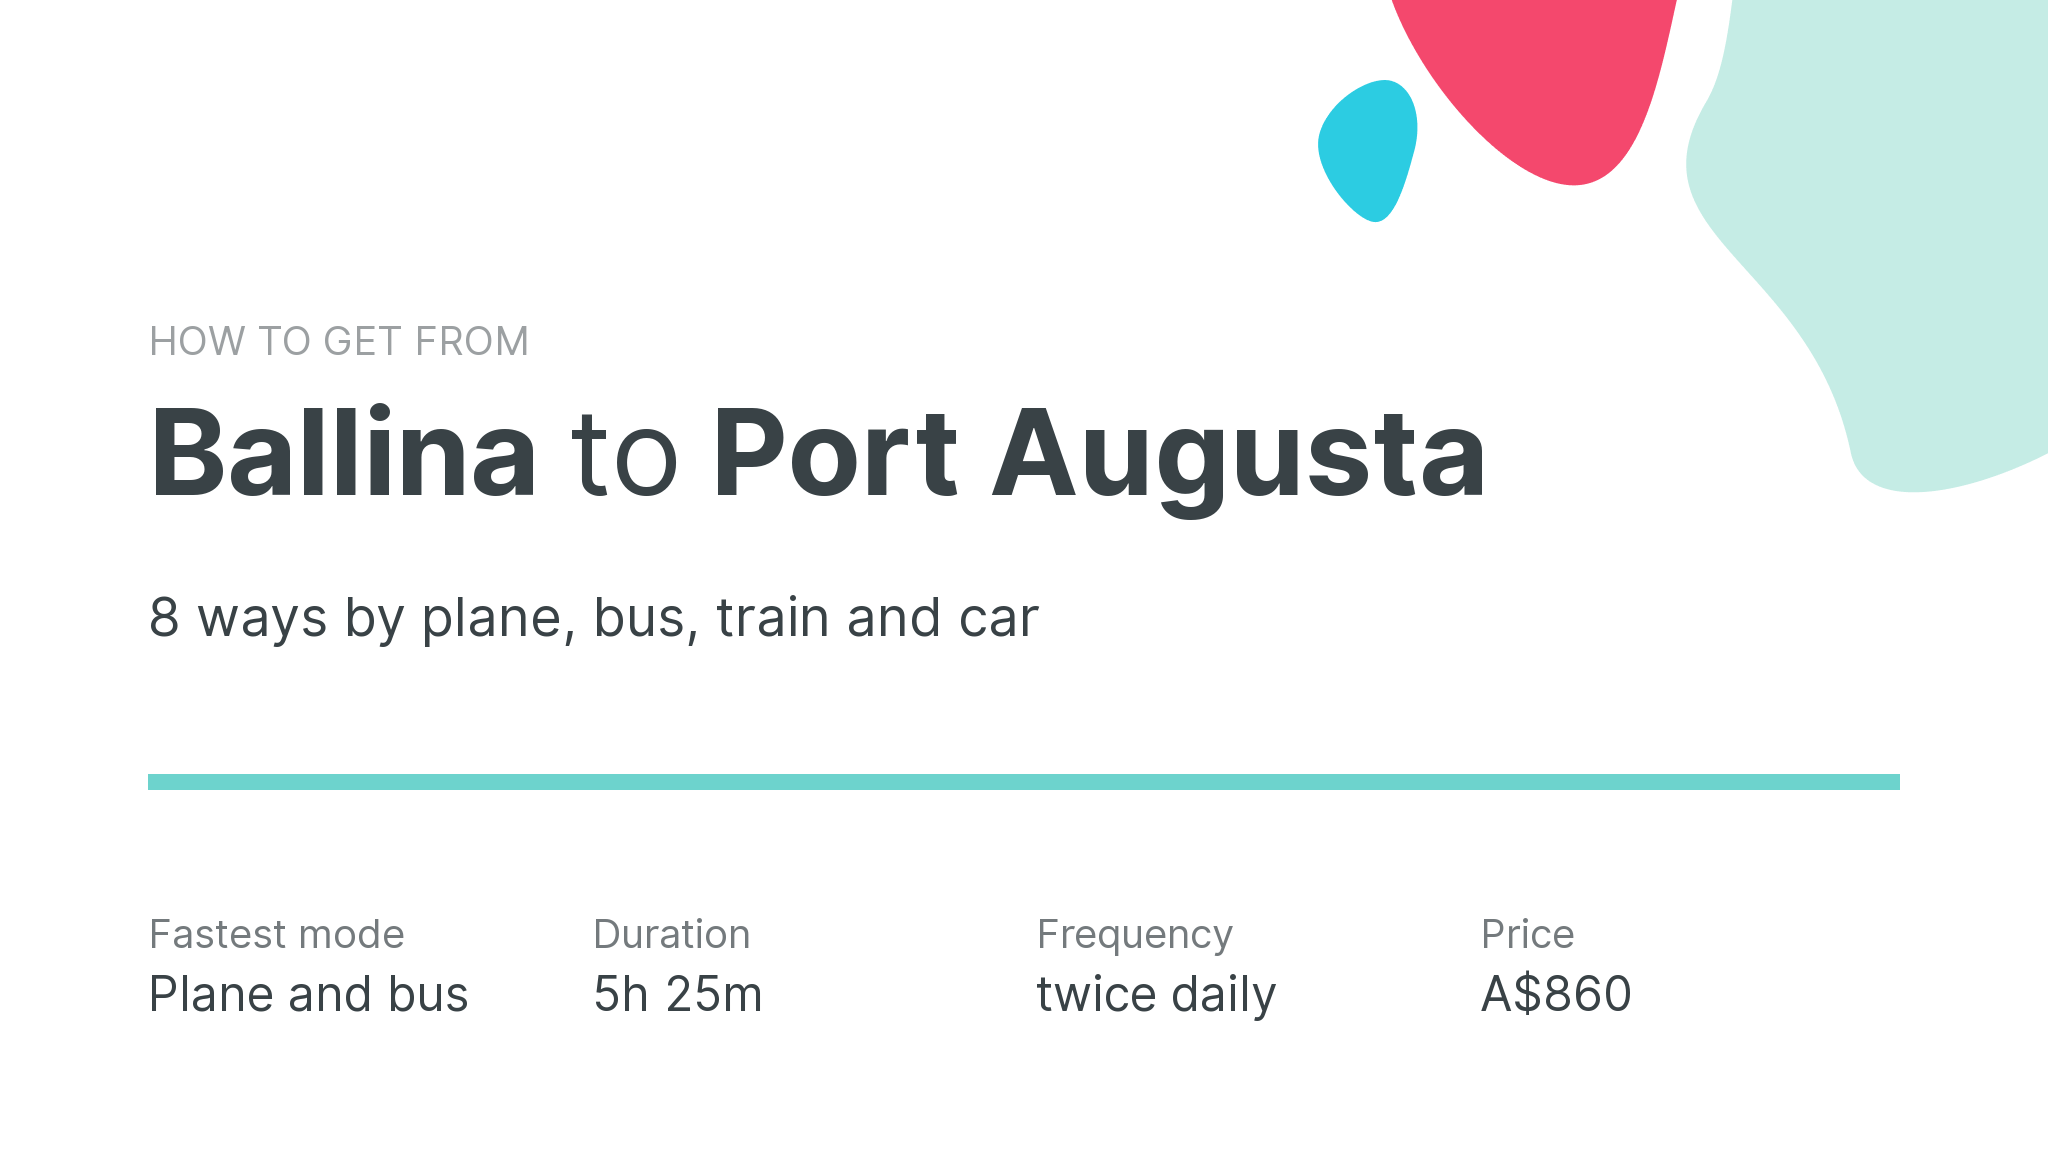 How do I get from Ballina to Port Augusta